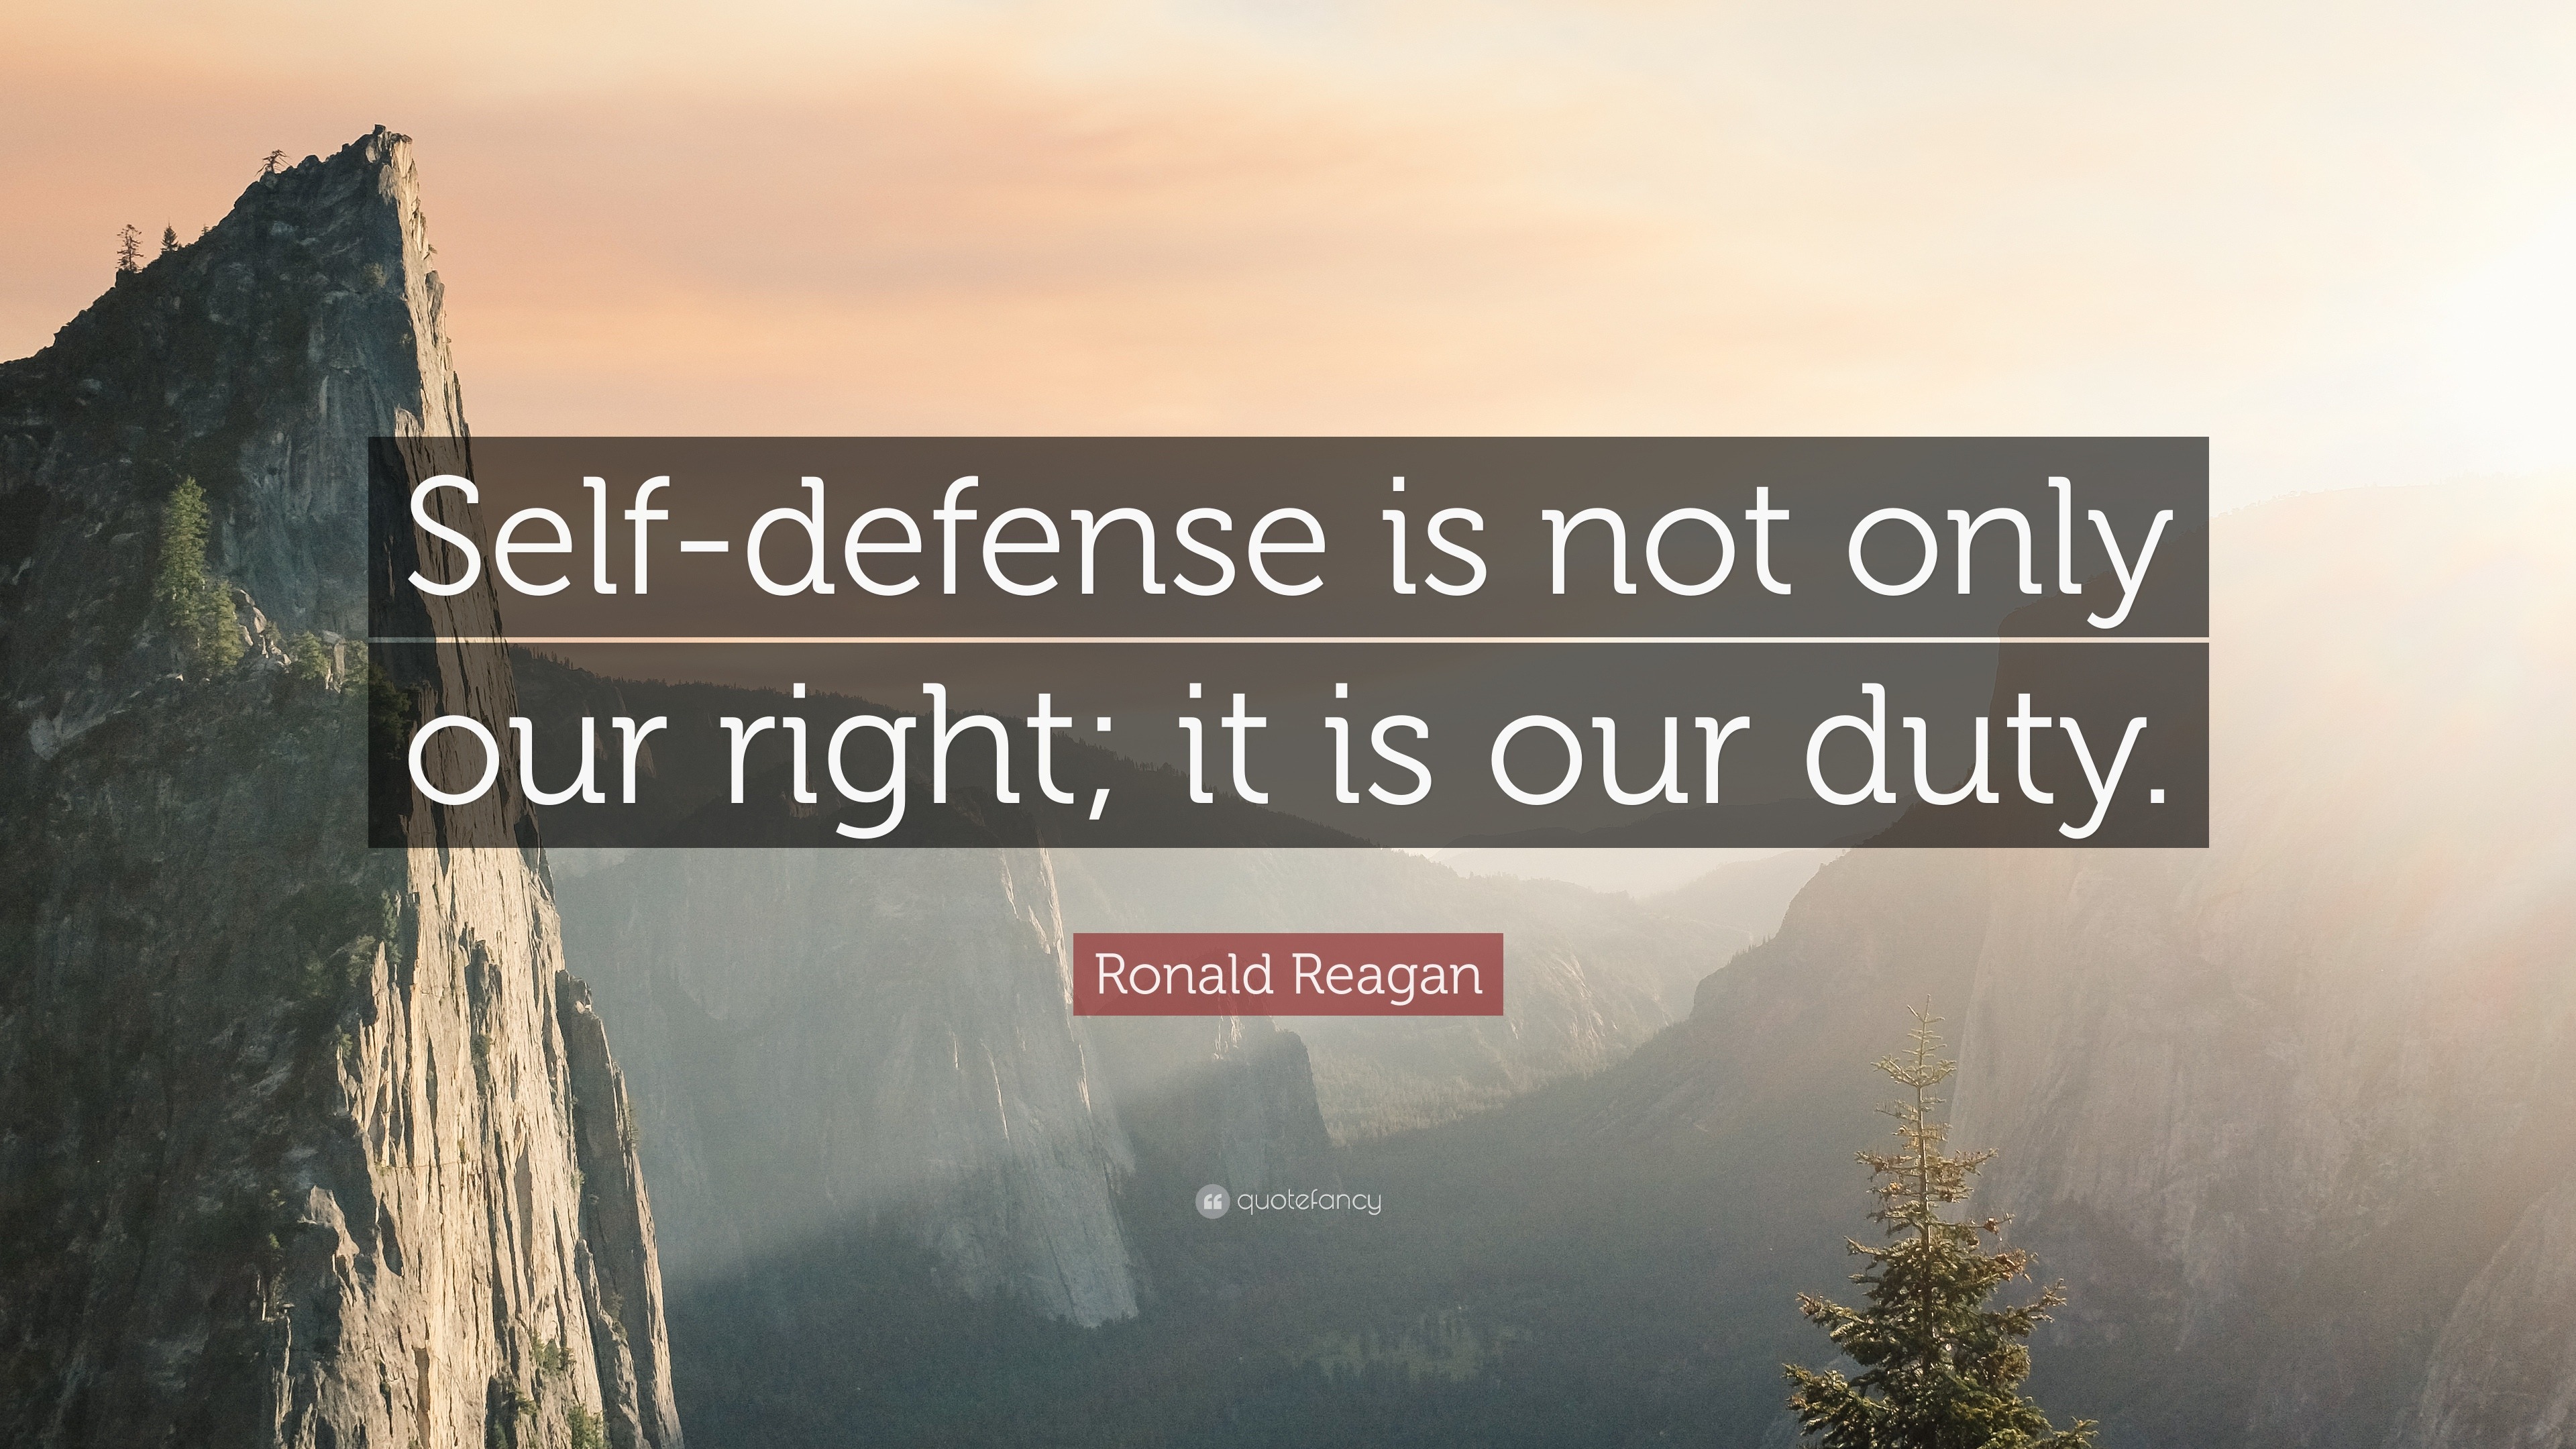 Ronald Reagan Quotes (100 wallpapers) - Quotefancy